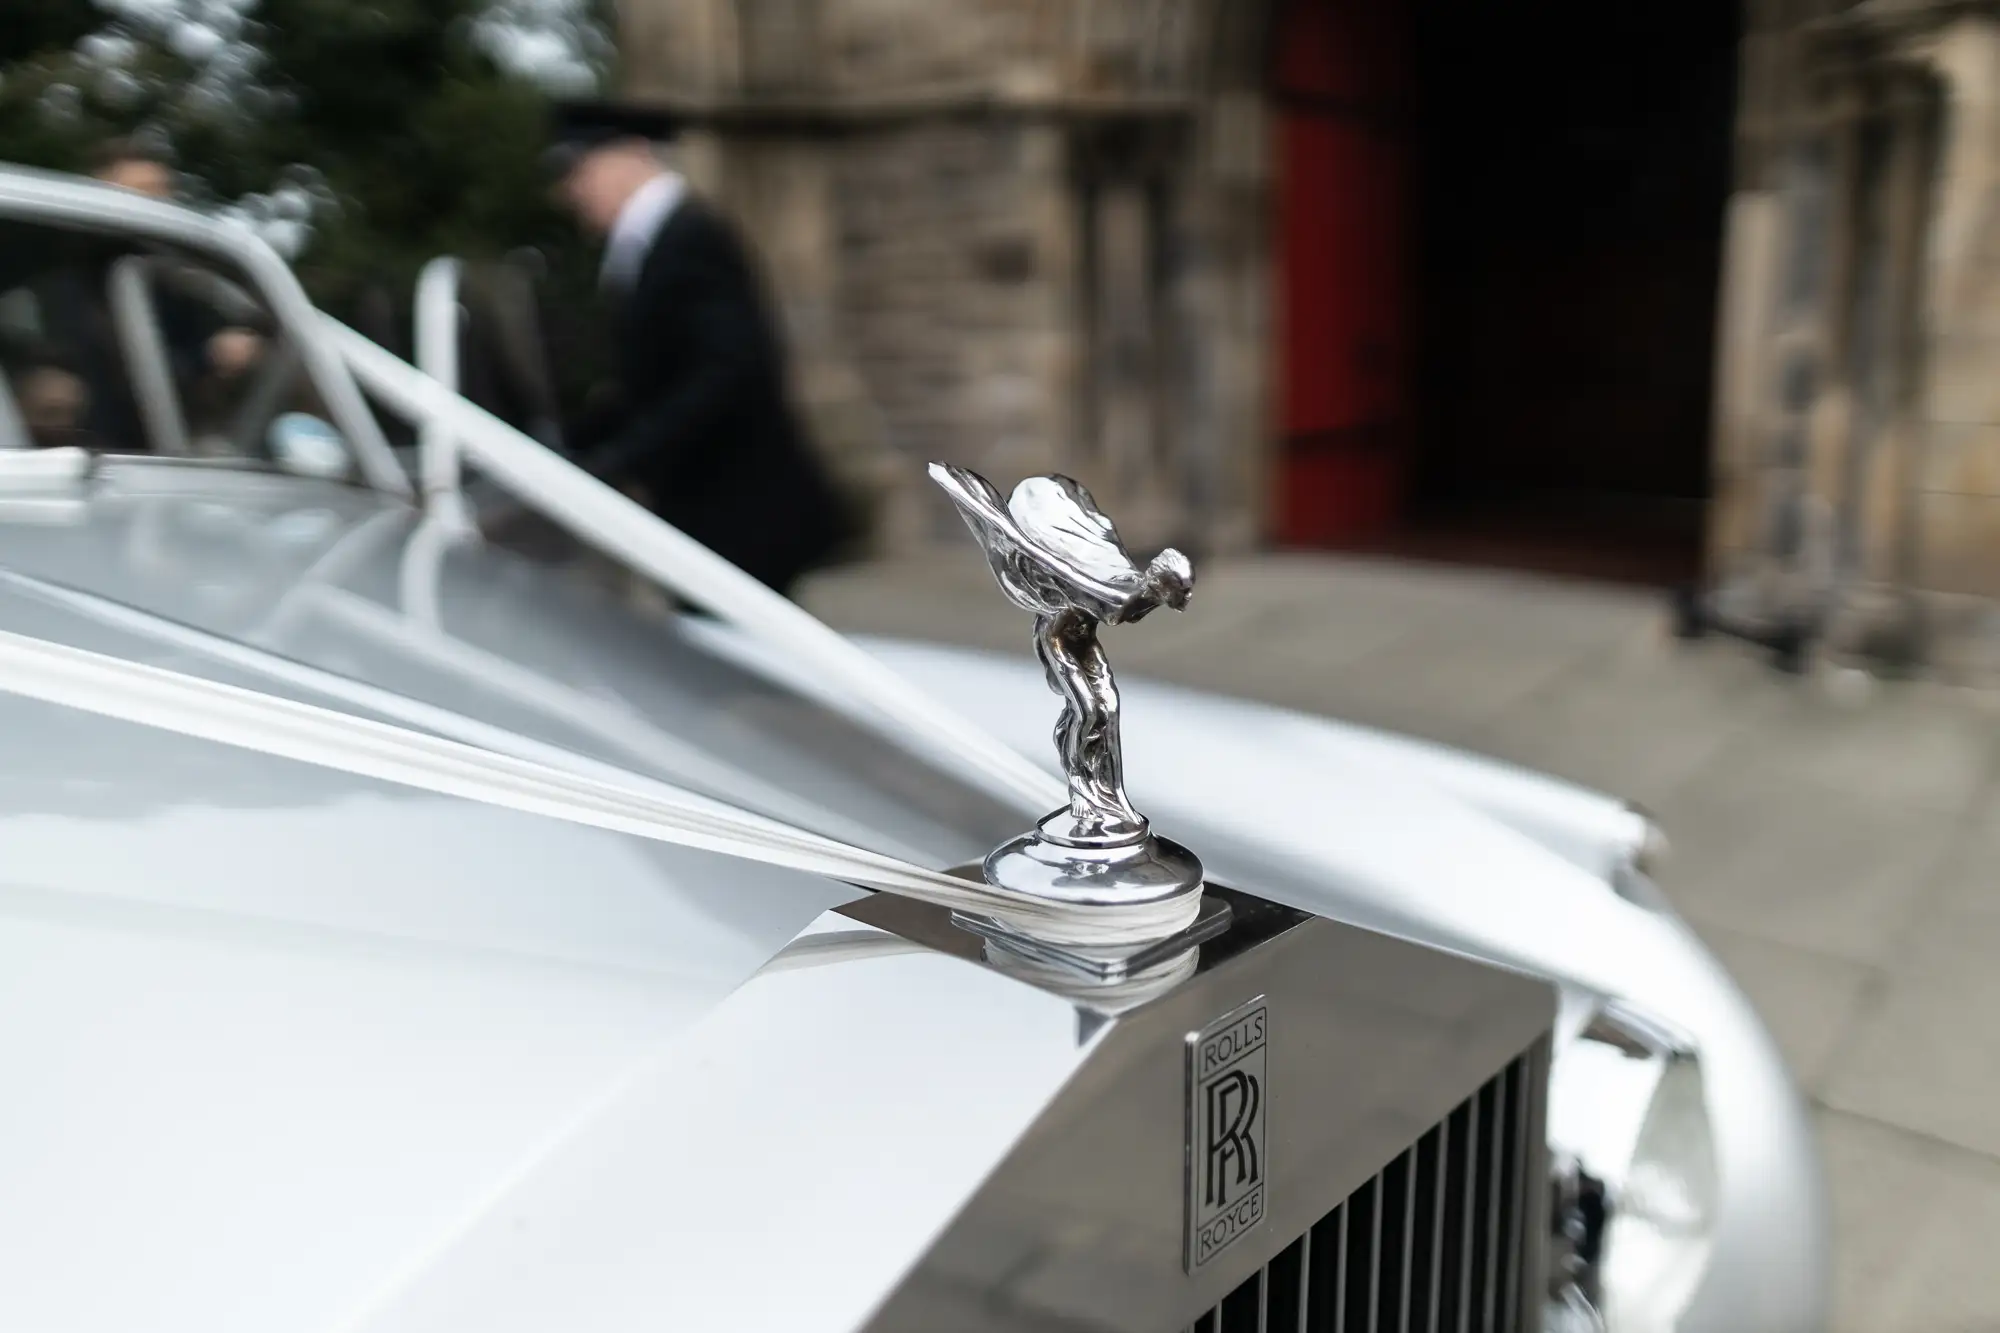 A rolls-royce hood ornament, featuring the iconic "spirit of ecstasy," mounted on the front of a white car with a blurry figure in the background.